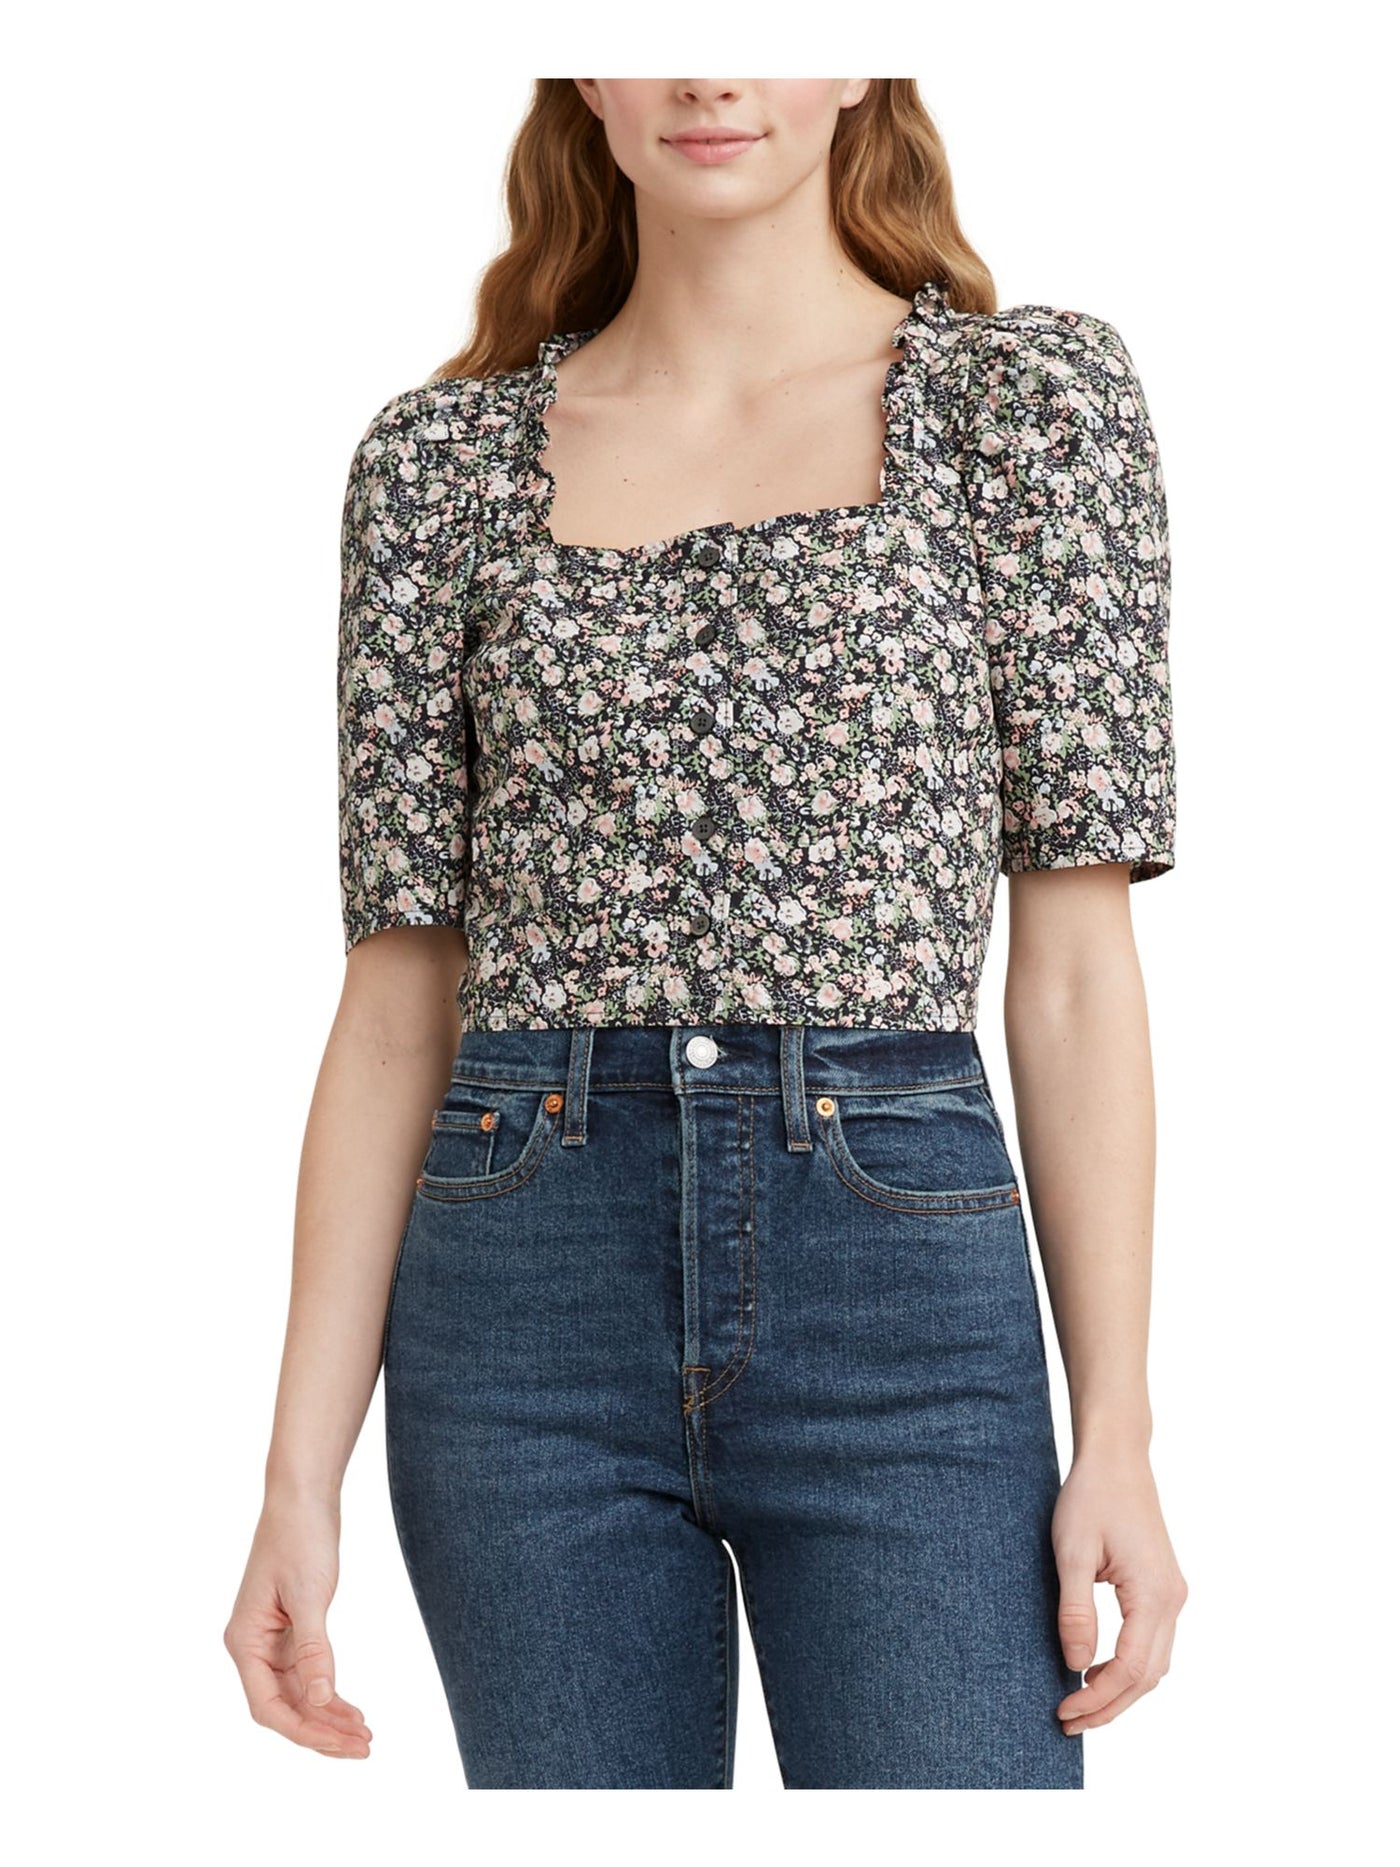 LEVI'S Womens Green Ruffled Buttoned Elbow-puff-sleeves Floral Square Neck Blouse S